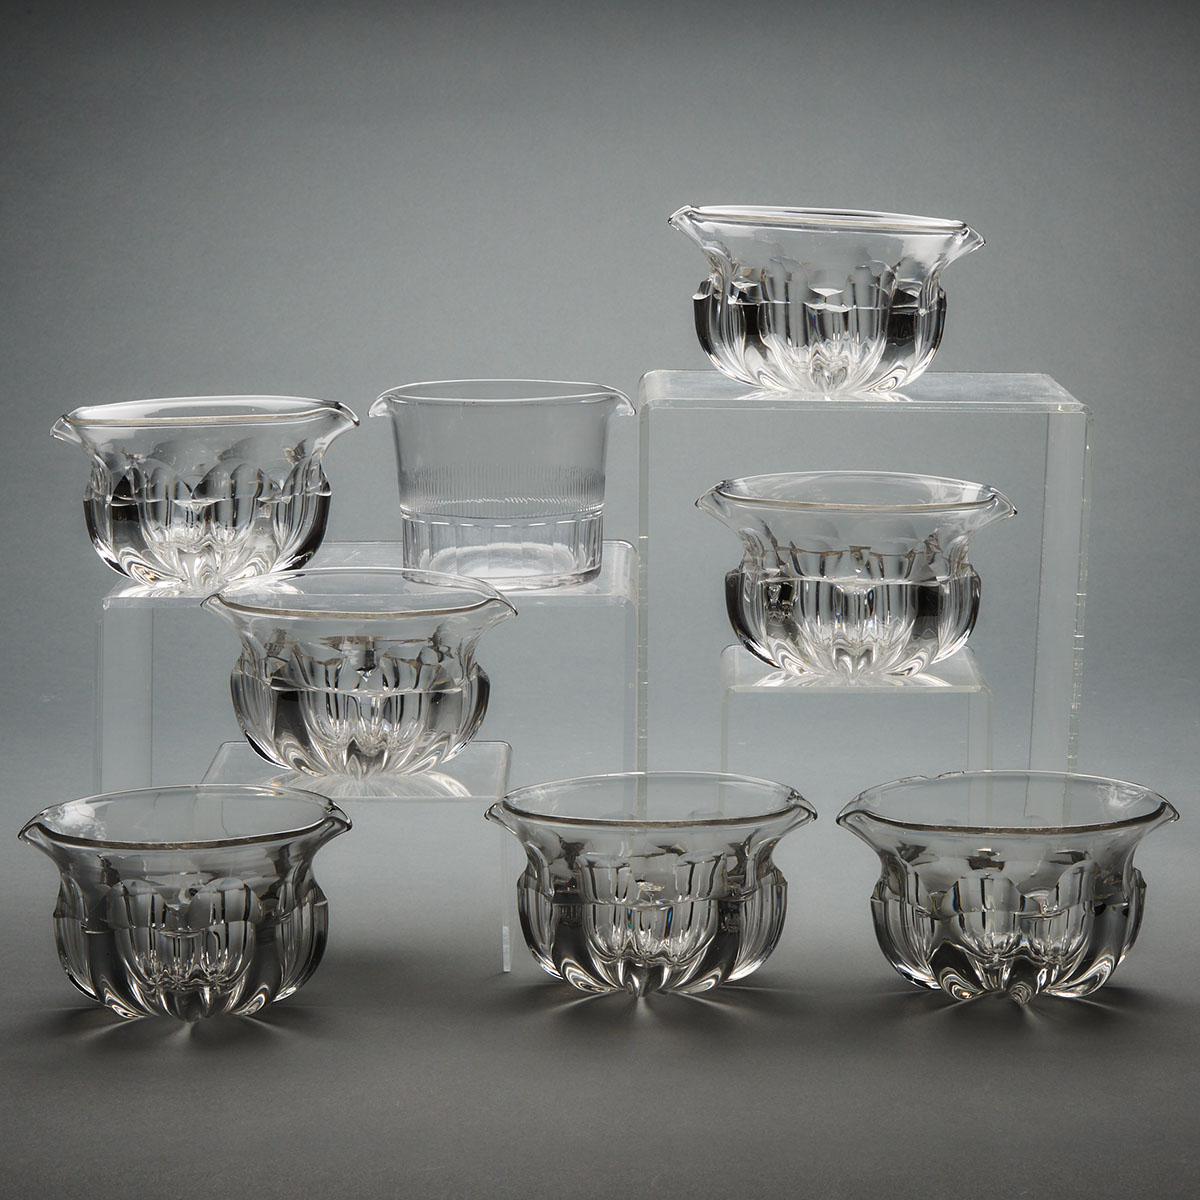 Eight Anglo-Irish Moulded and Cut Glass Rinsing Bowls, 19th century